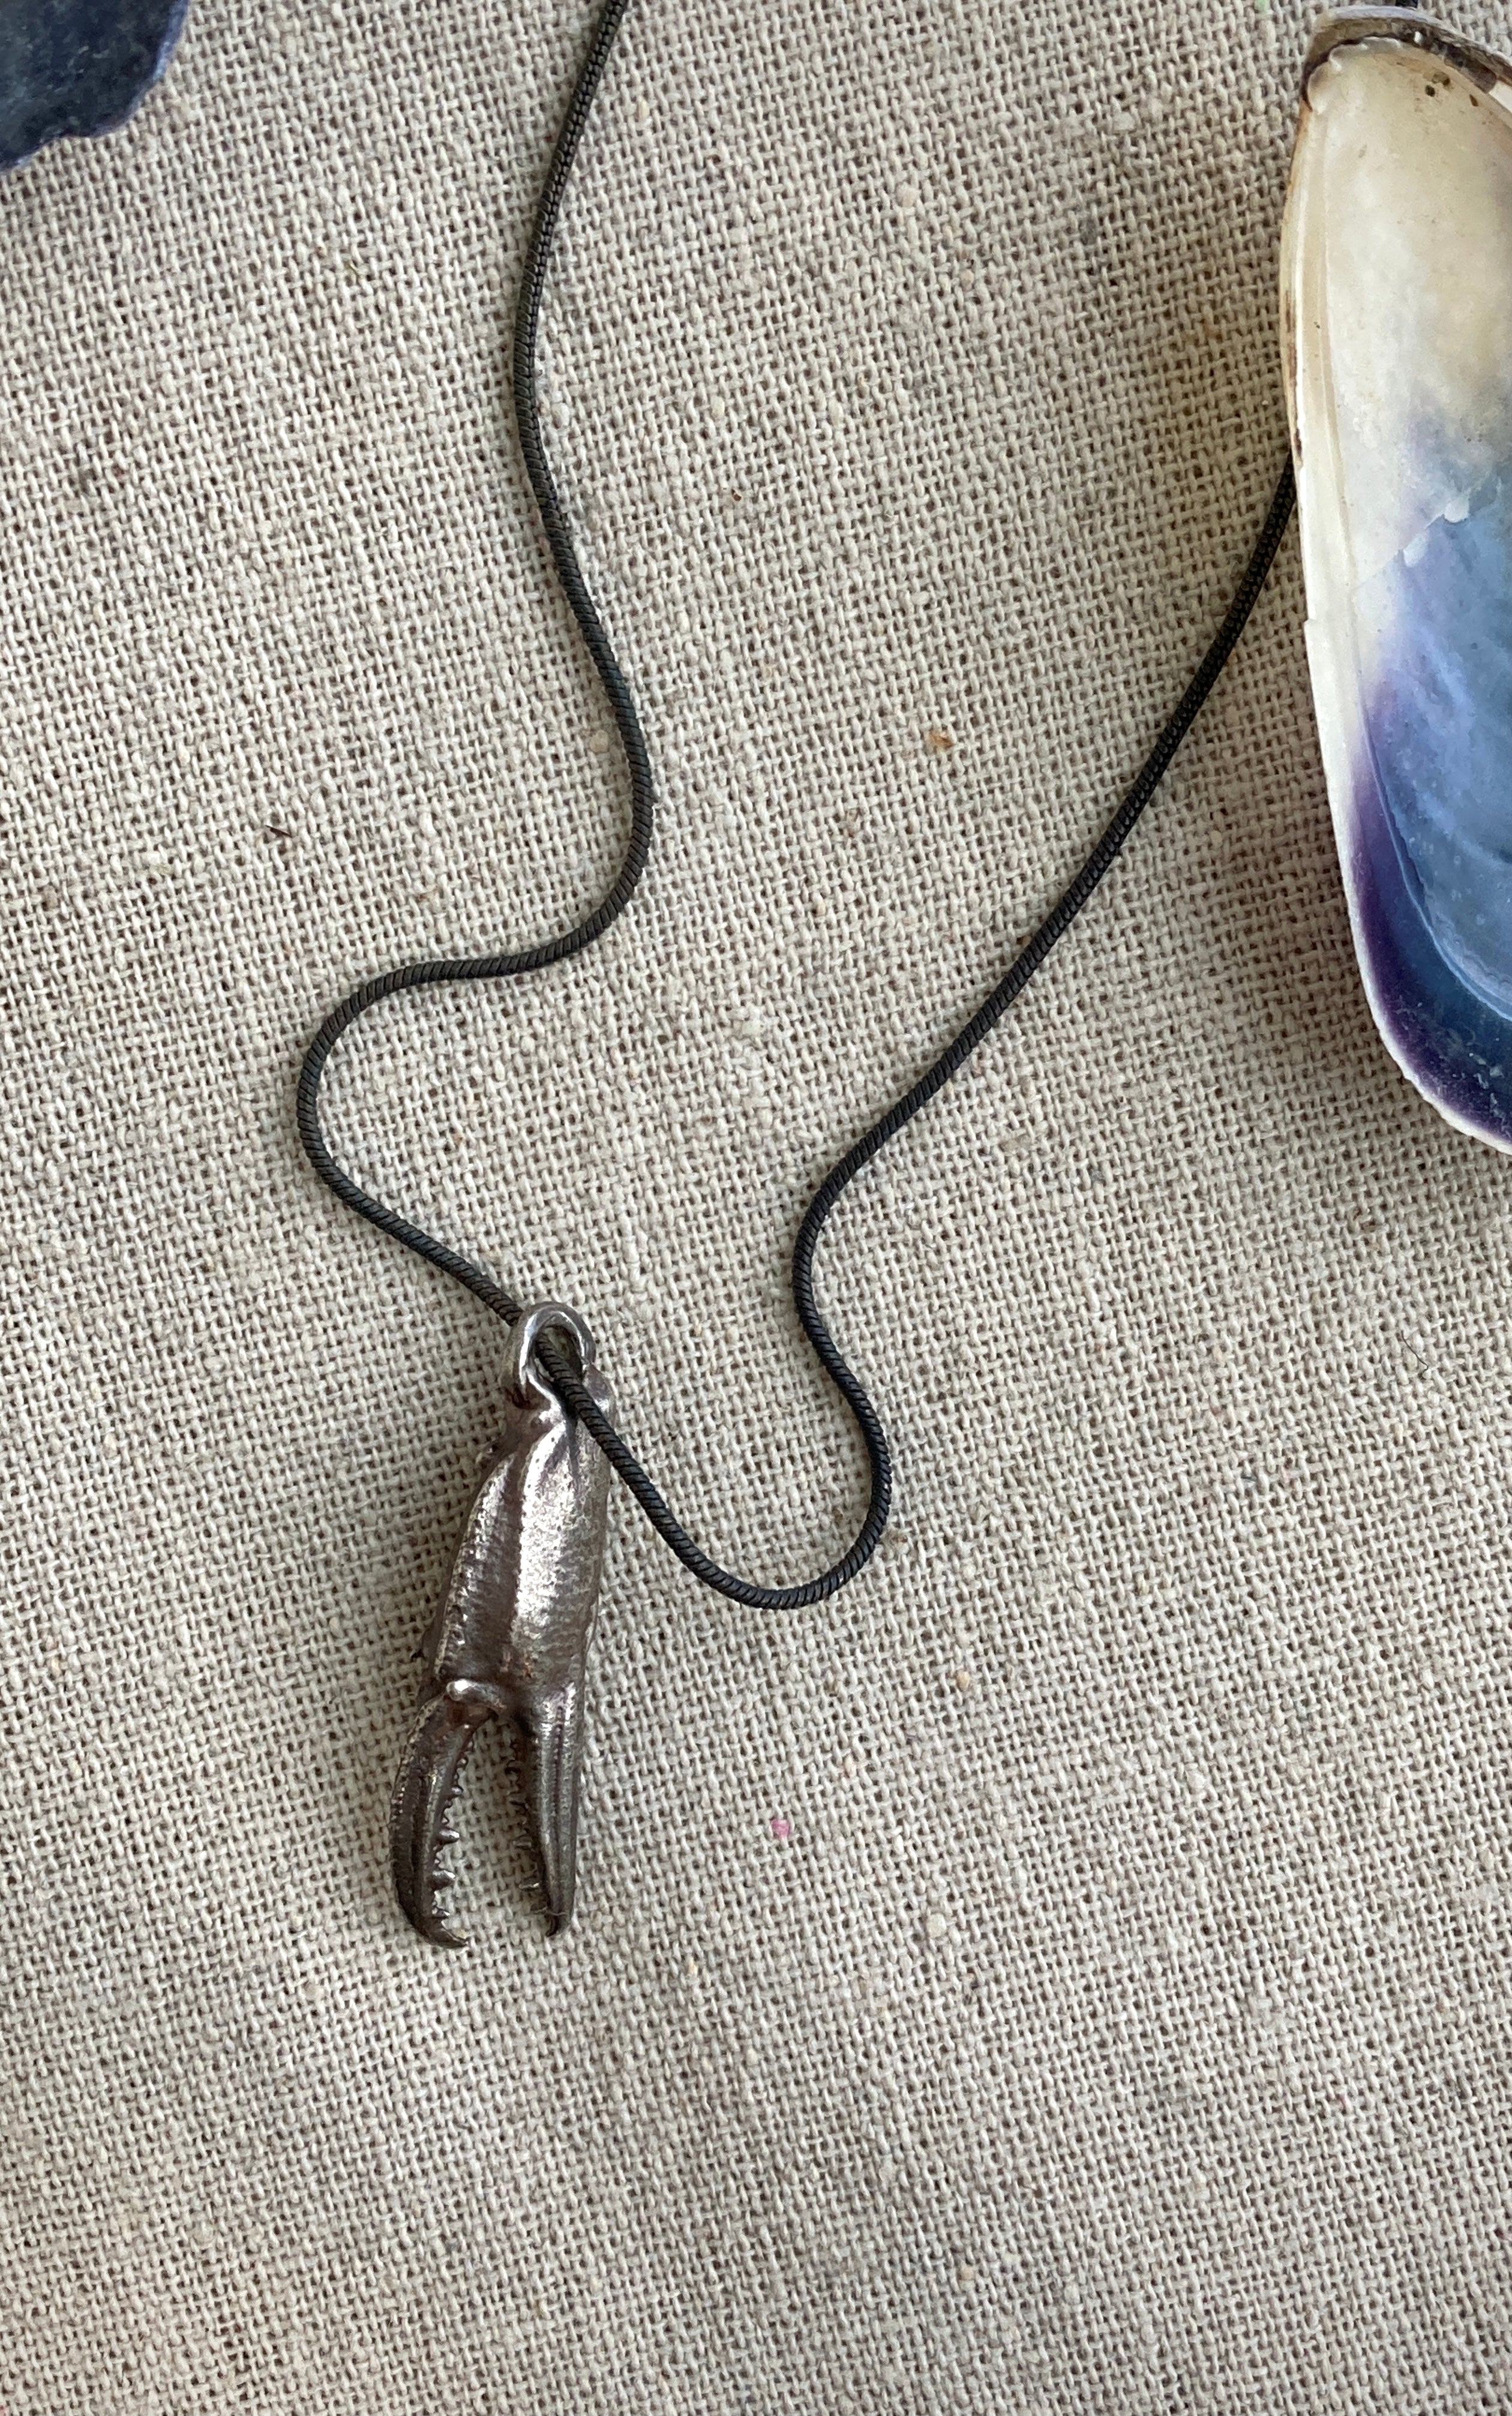 Small Crab Claw Necklace Antique Silver Crab Claw Pendant Beach Jewelry -  Etsy